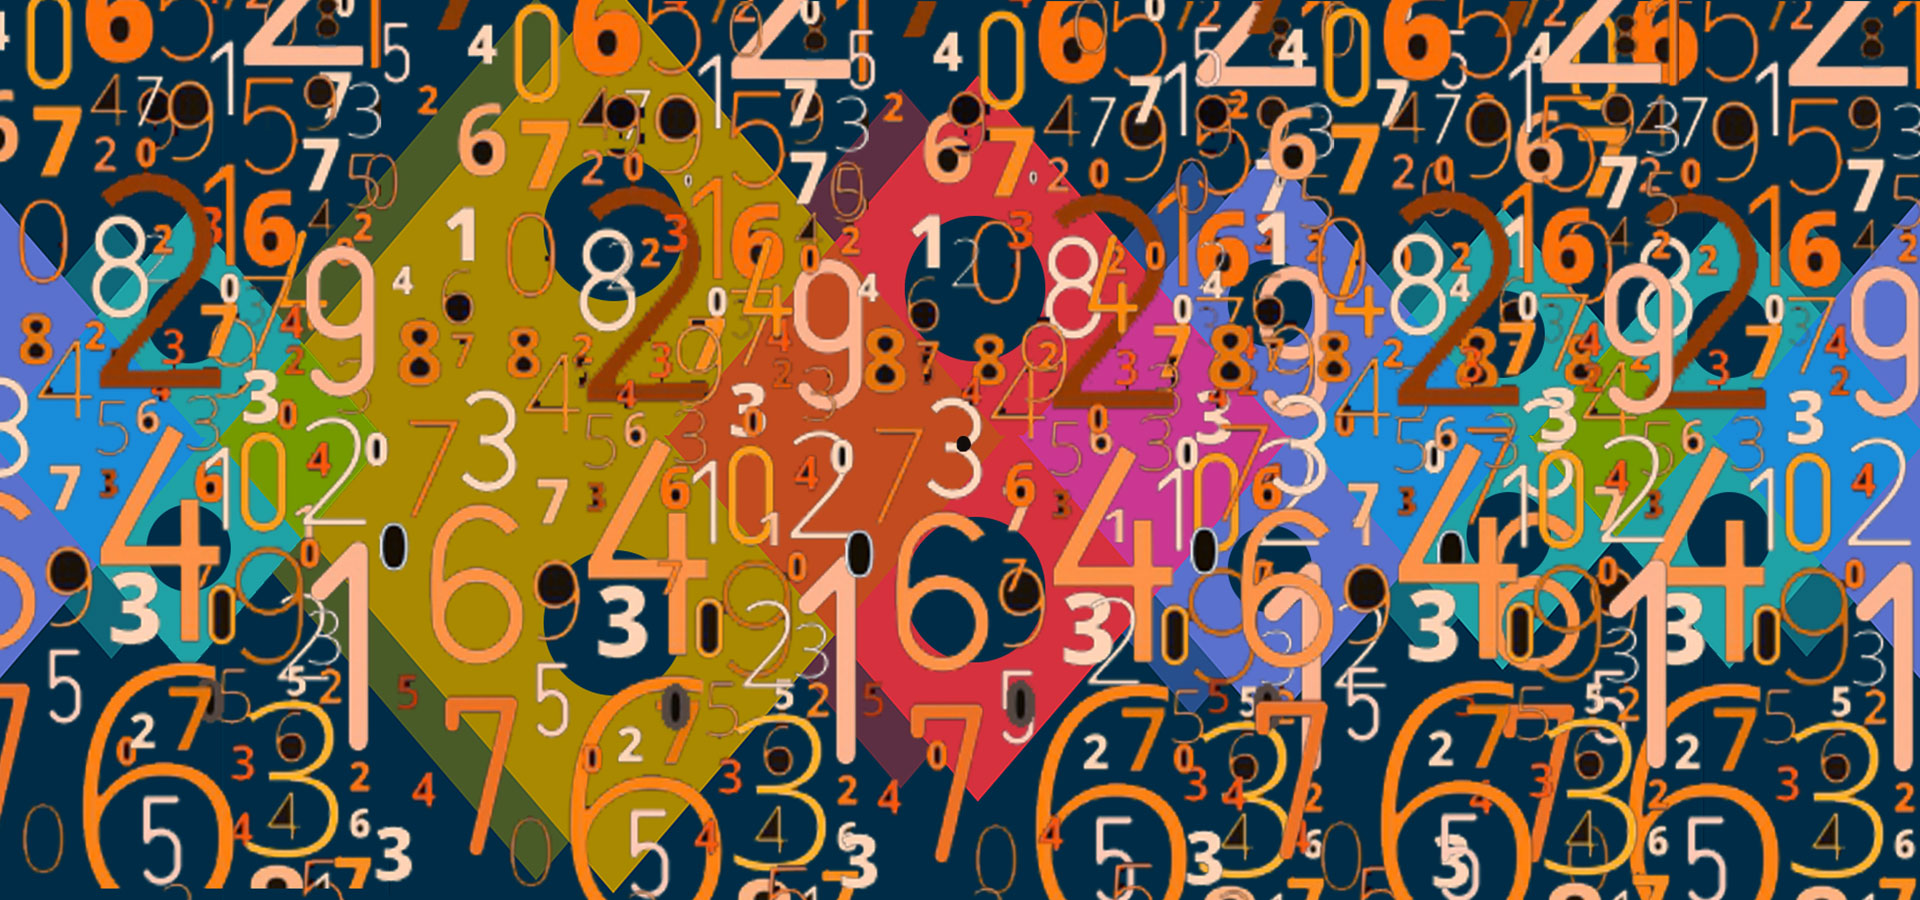 Numerology | Meaning of numbers